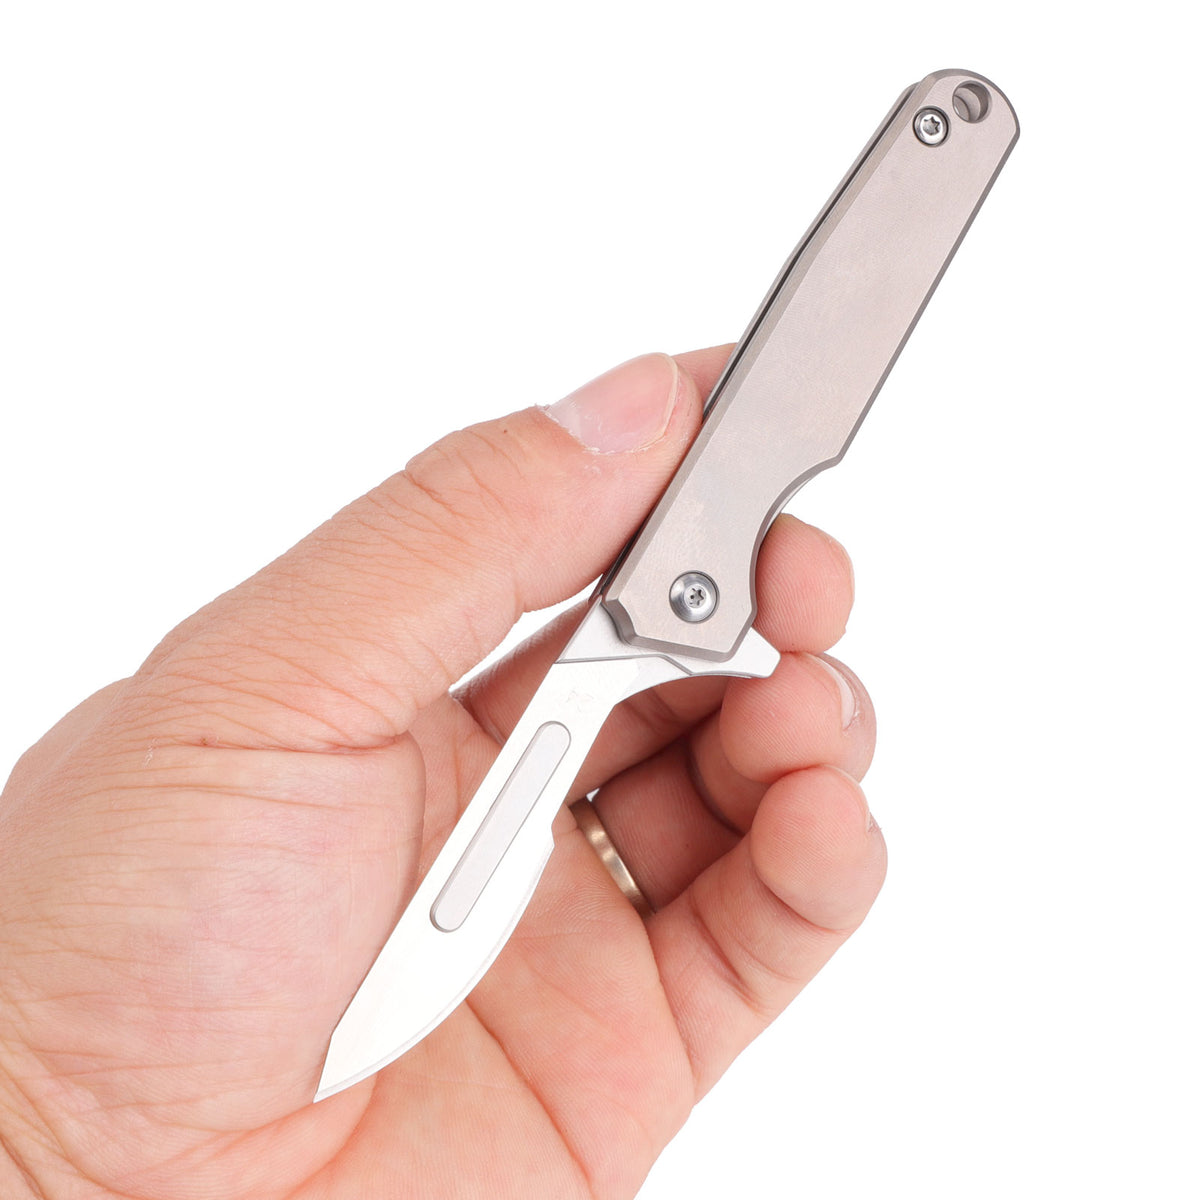 Samior Stubby Chisel Knife Opens Packages with Ease